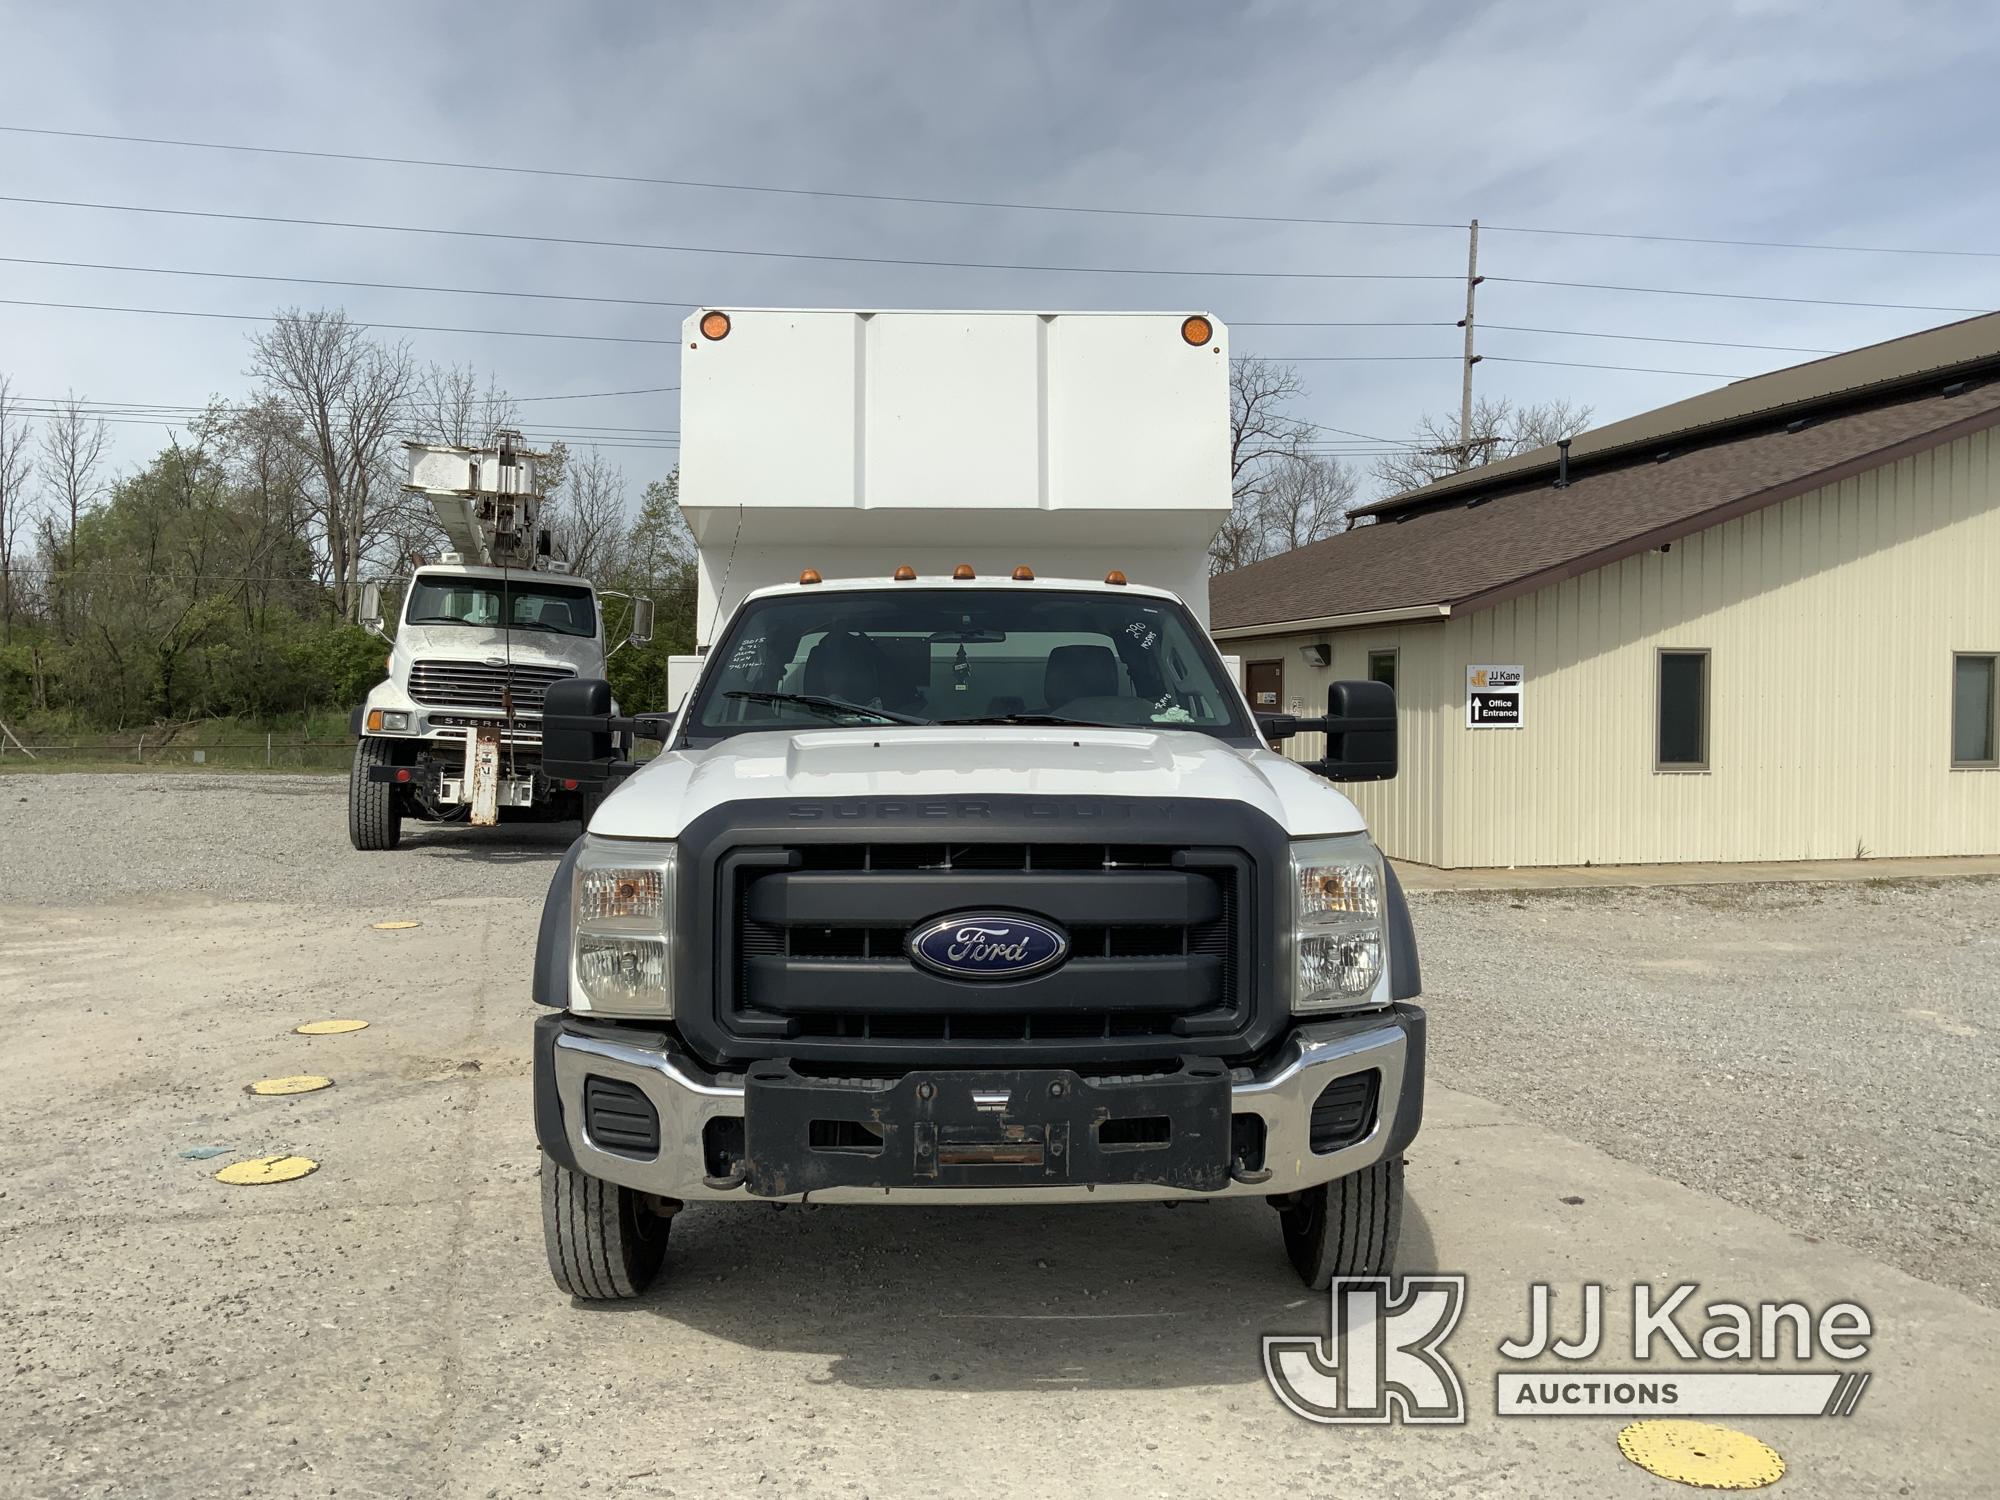 (Fort Wayne, IN) 2015 Ford F550 4x4 Extended-Cab Chipper Dump Truck Runs, Moves & Operates) (Check E